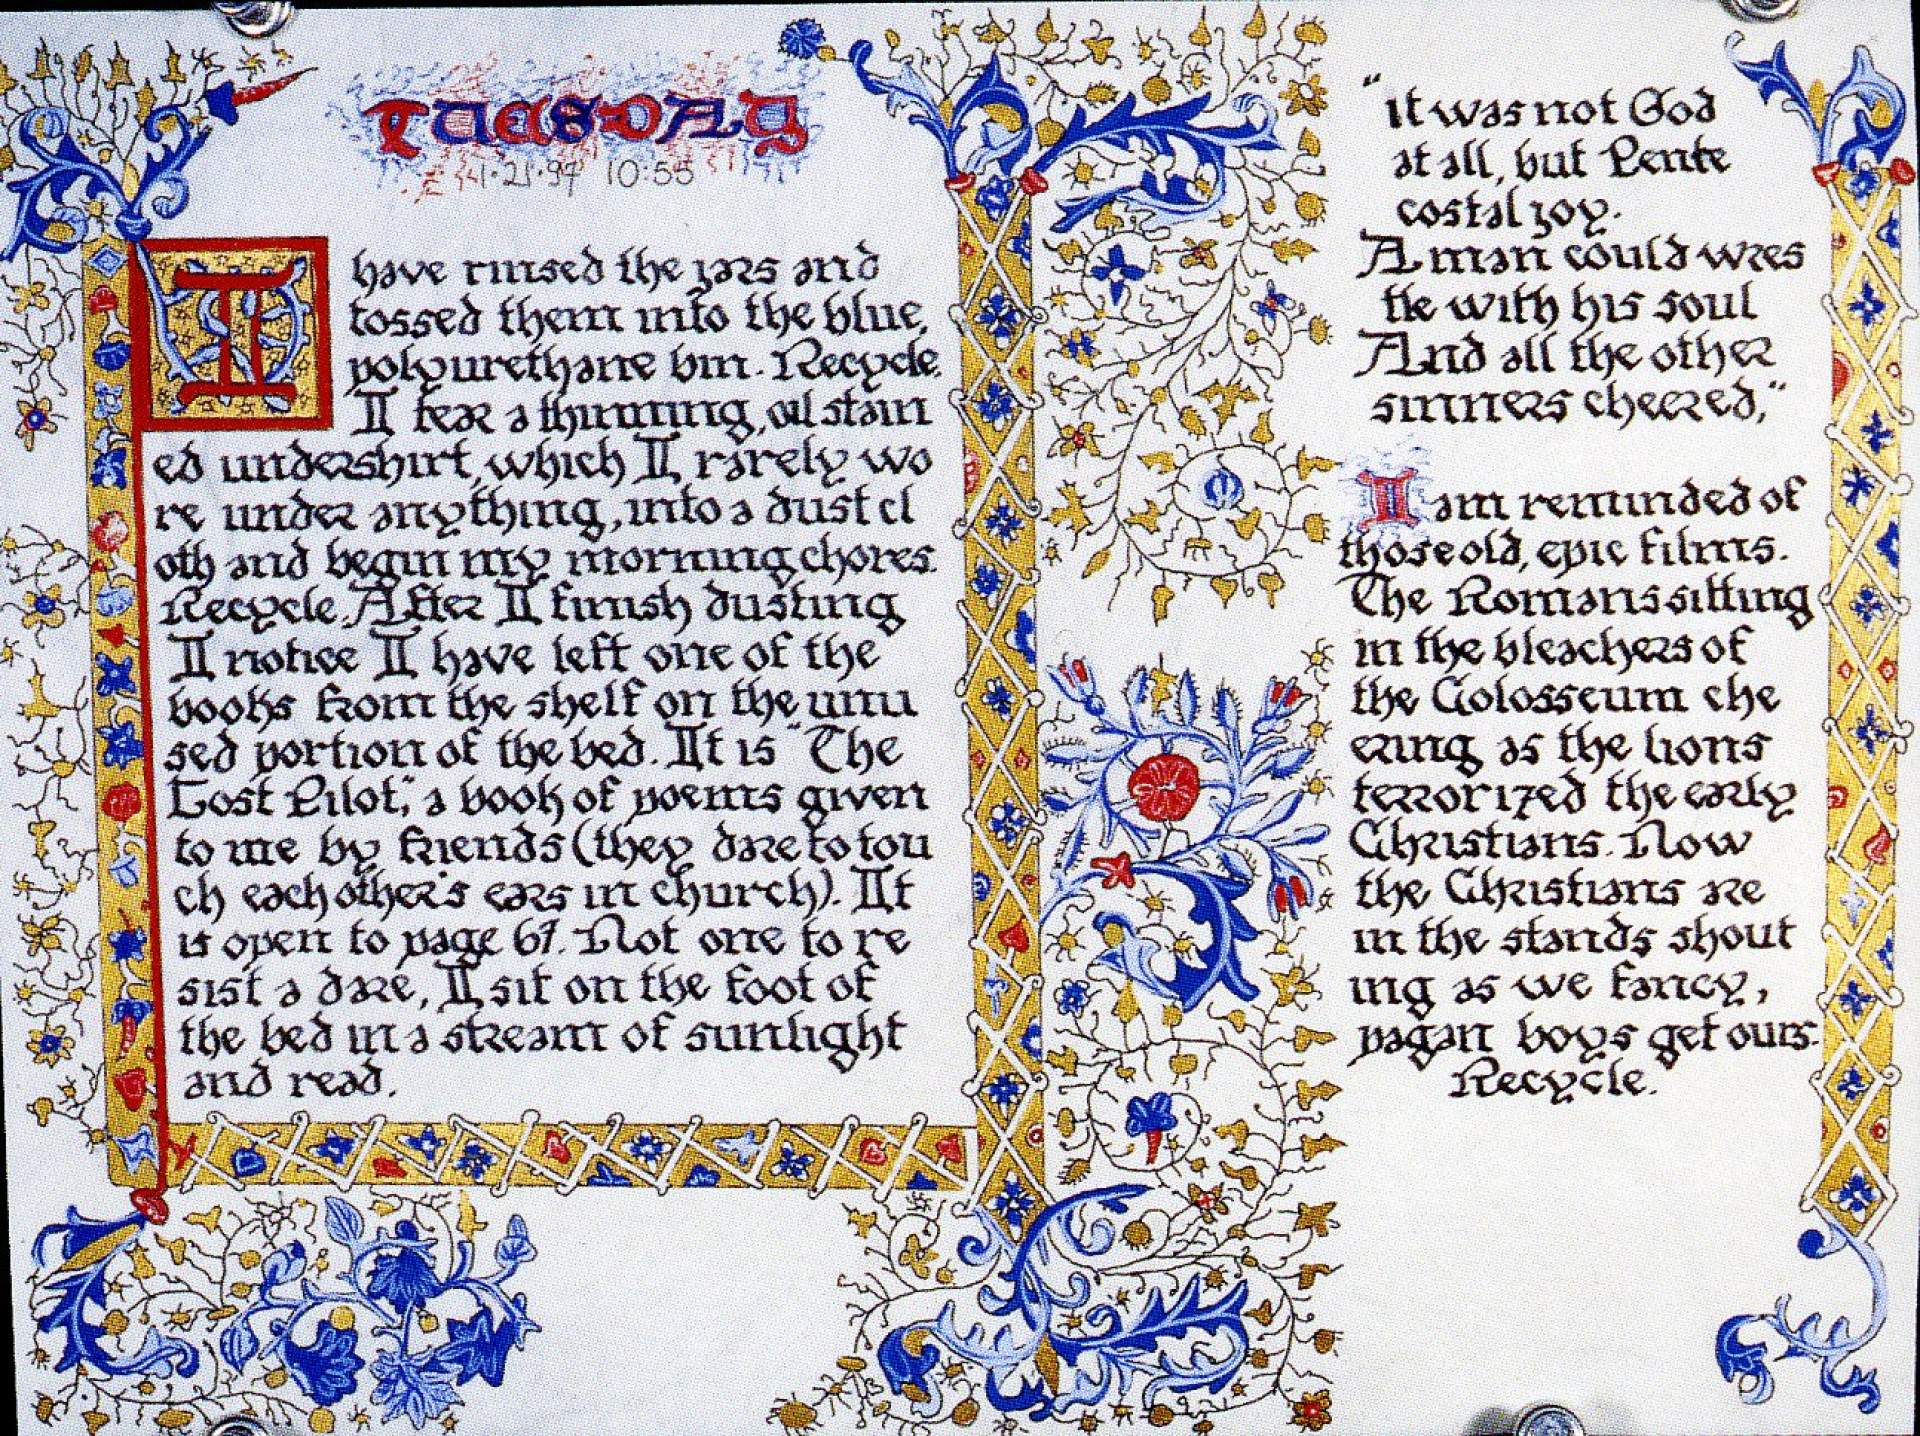 Rosemary K. Lyons: The Book of Hours